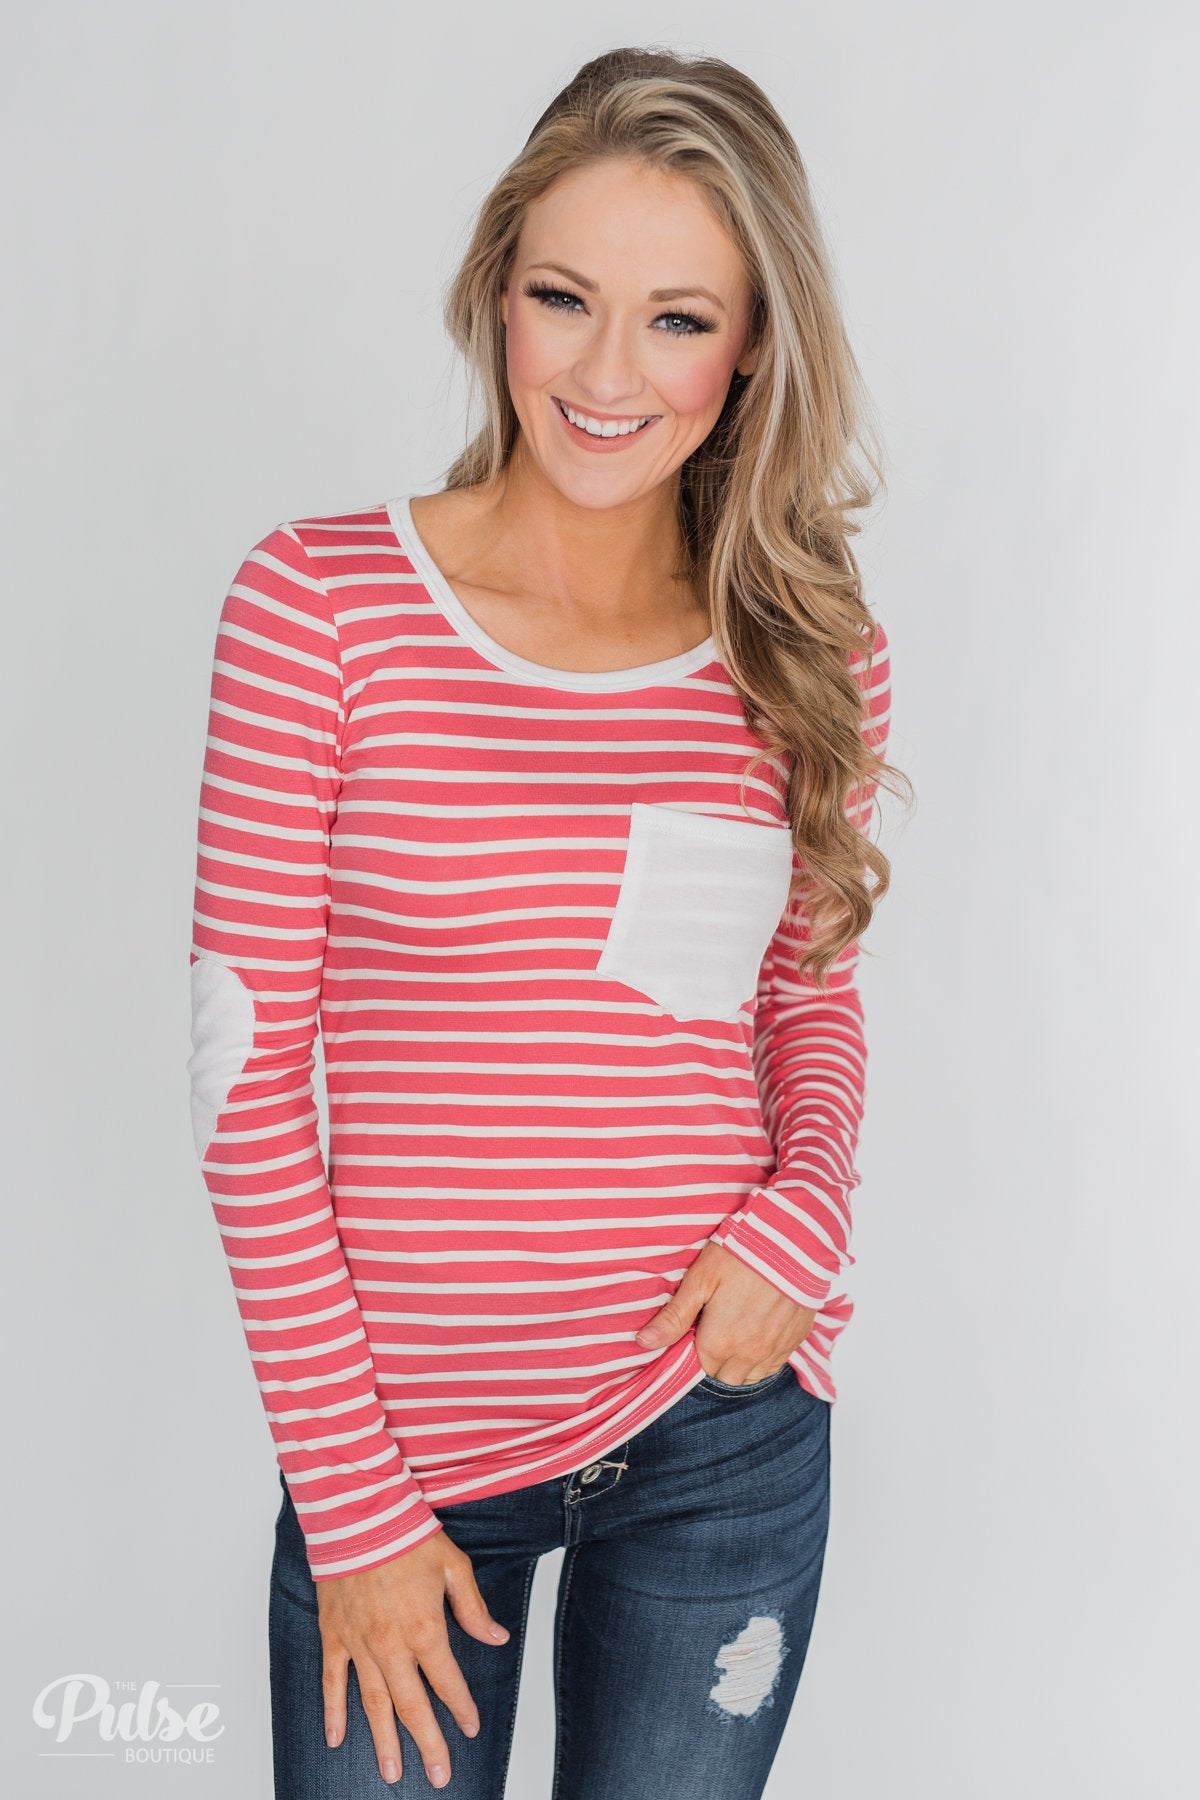 Forever Mine Heart Elbow Patch Top - Raspberry Pink